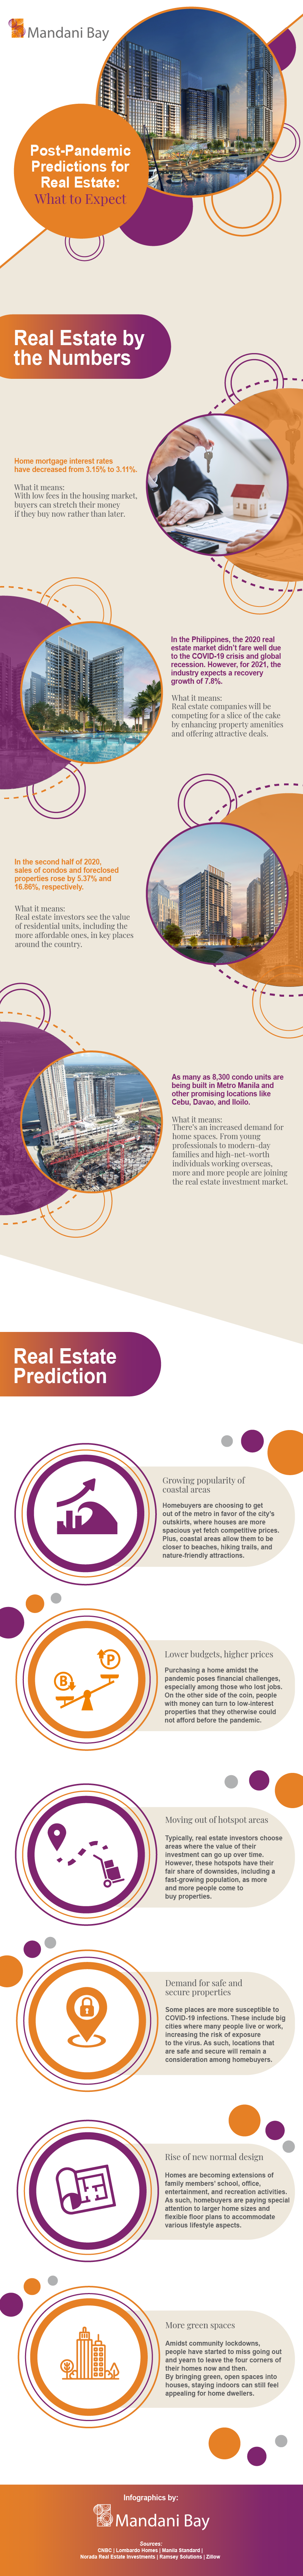 Post-Pandemic Predictions for Real Estate_ What to Expect